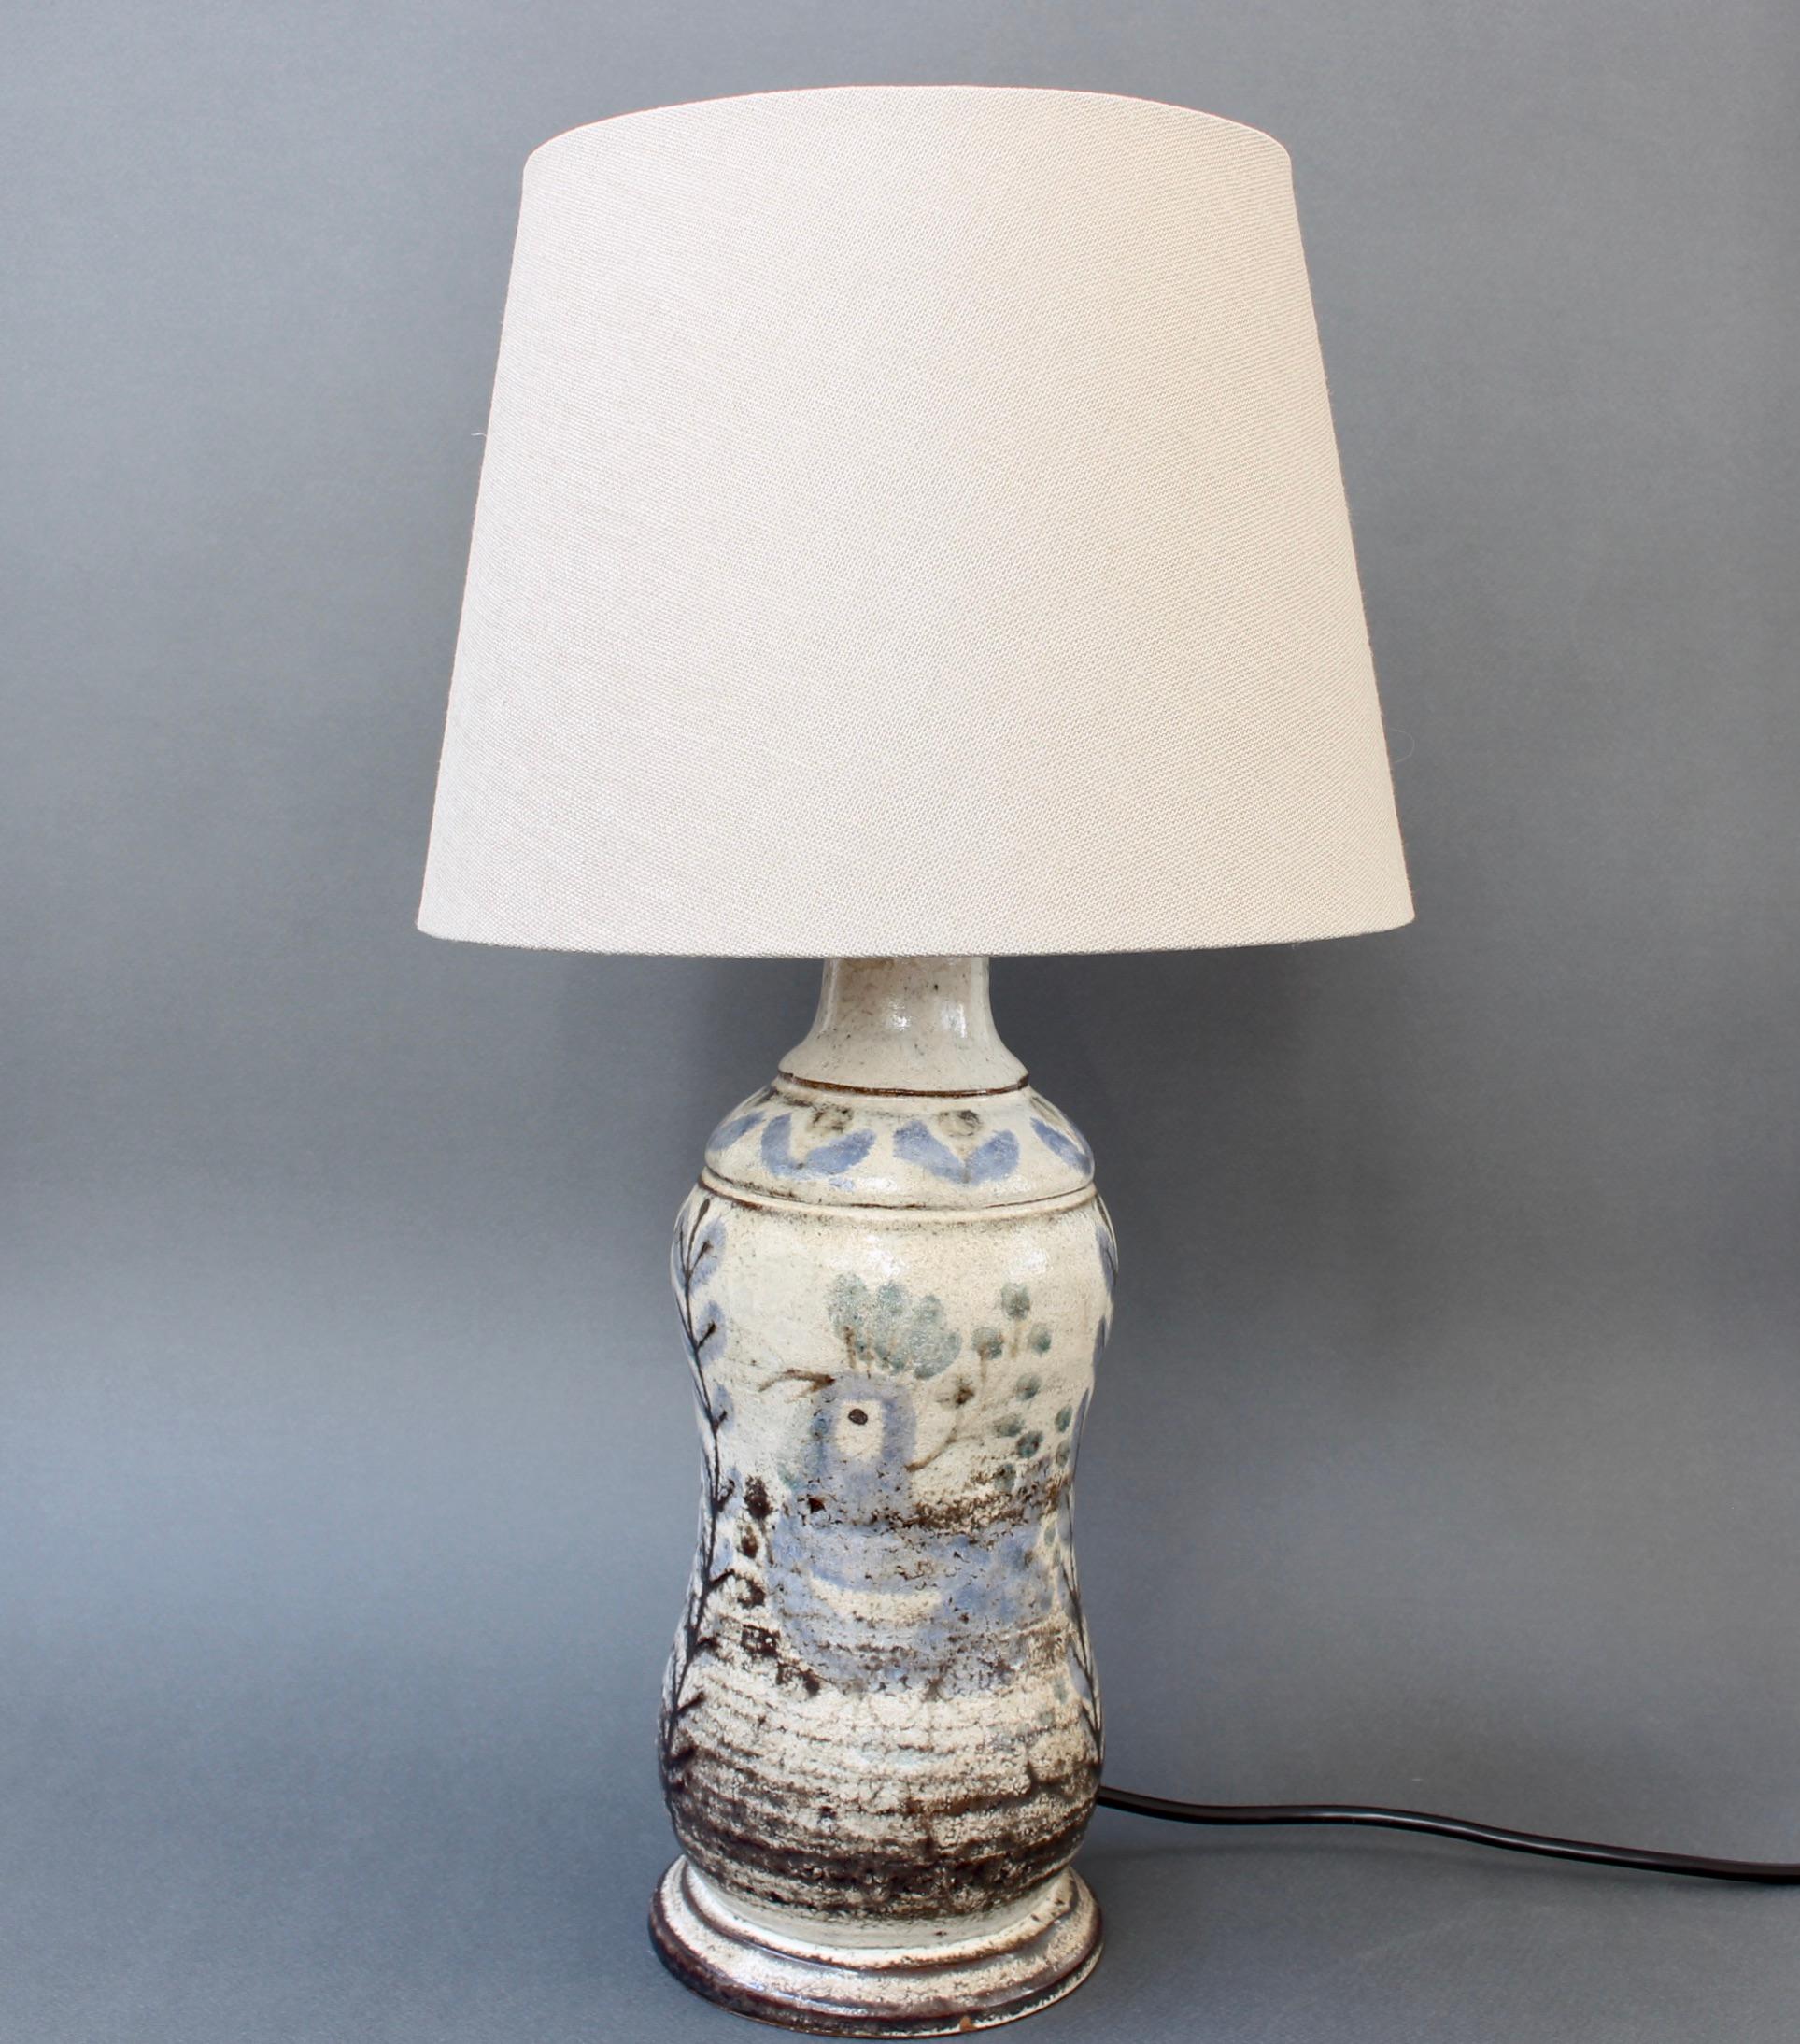 French ceramic table lamp (circa 1960s) by Le Mûrier studios. A charming and very delightful table lamp with French rooster and plants motif decorated on a gourd-shaped body. Blue painted accents cover the milky-white ceramic with darkened, earthy